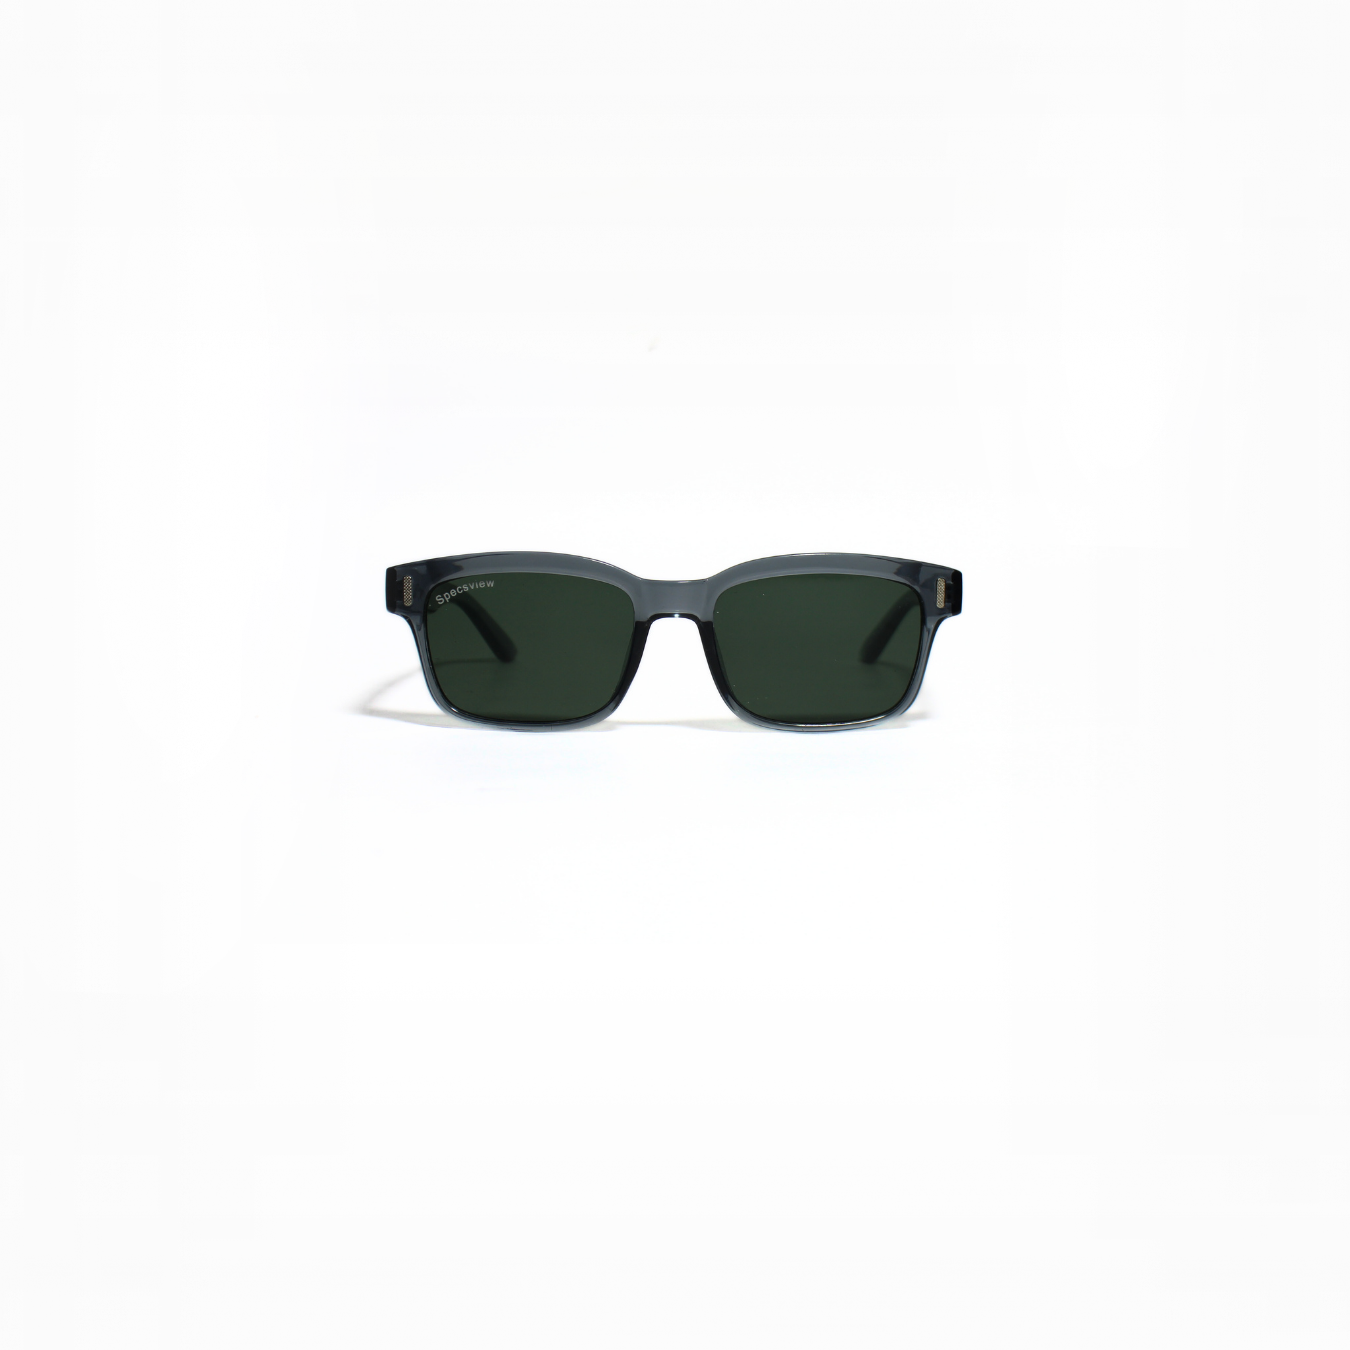 SPECTRE//004 I Sunglasses for Men and Women - Specsview